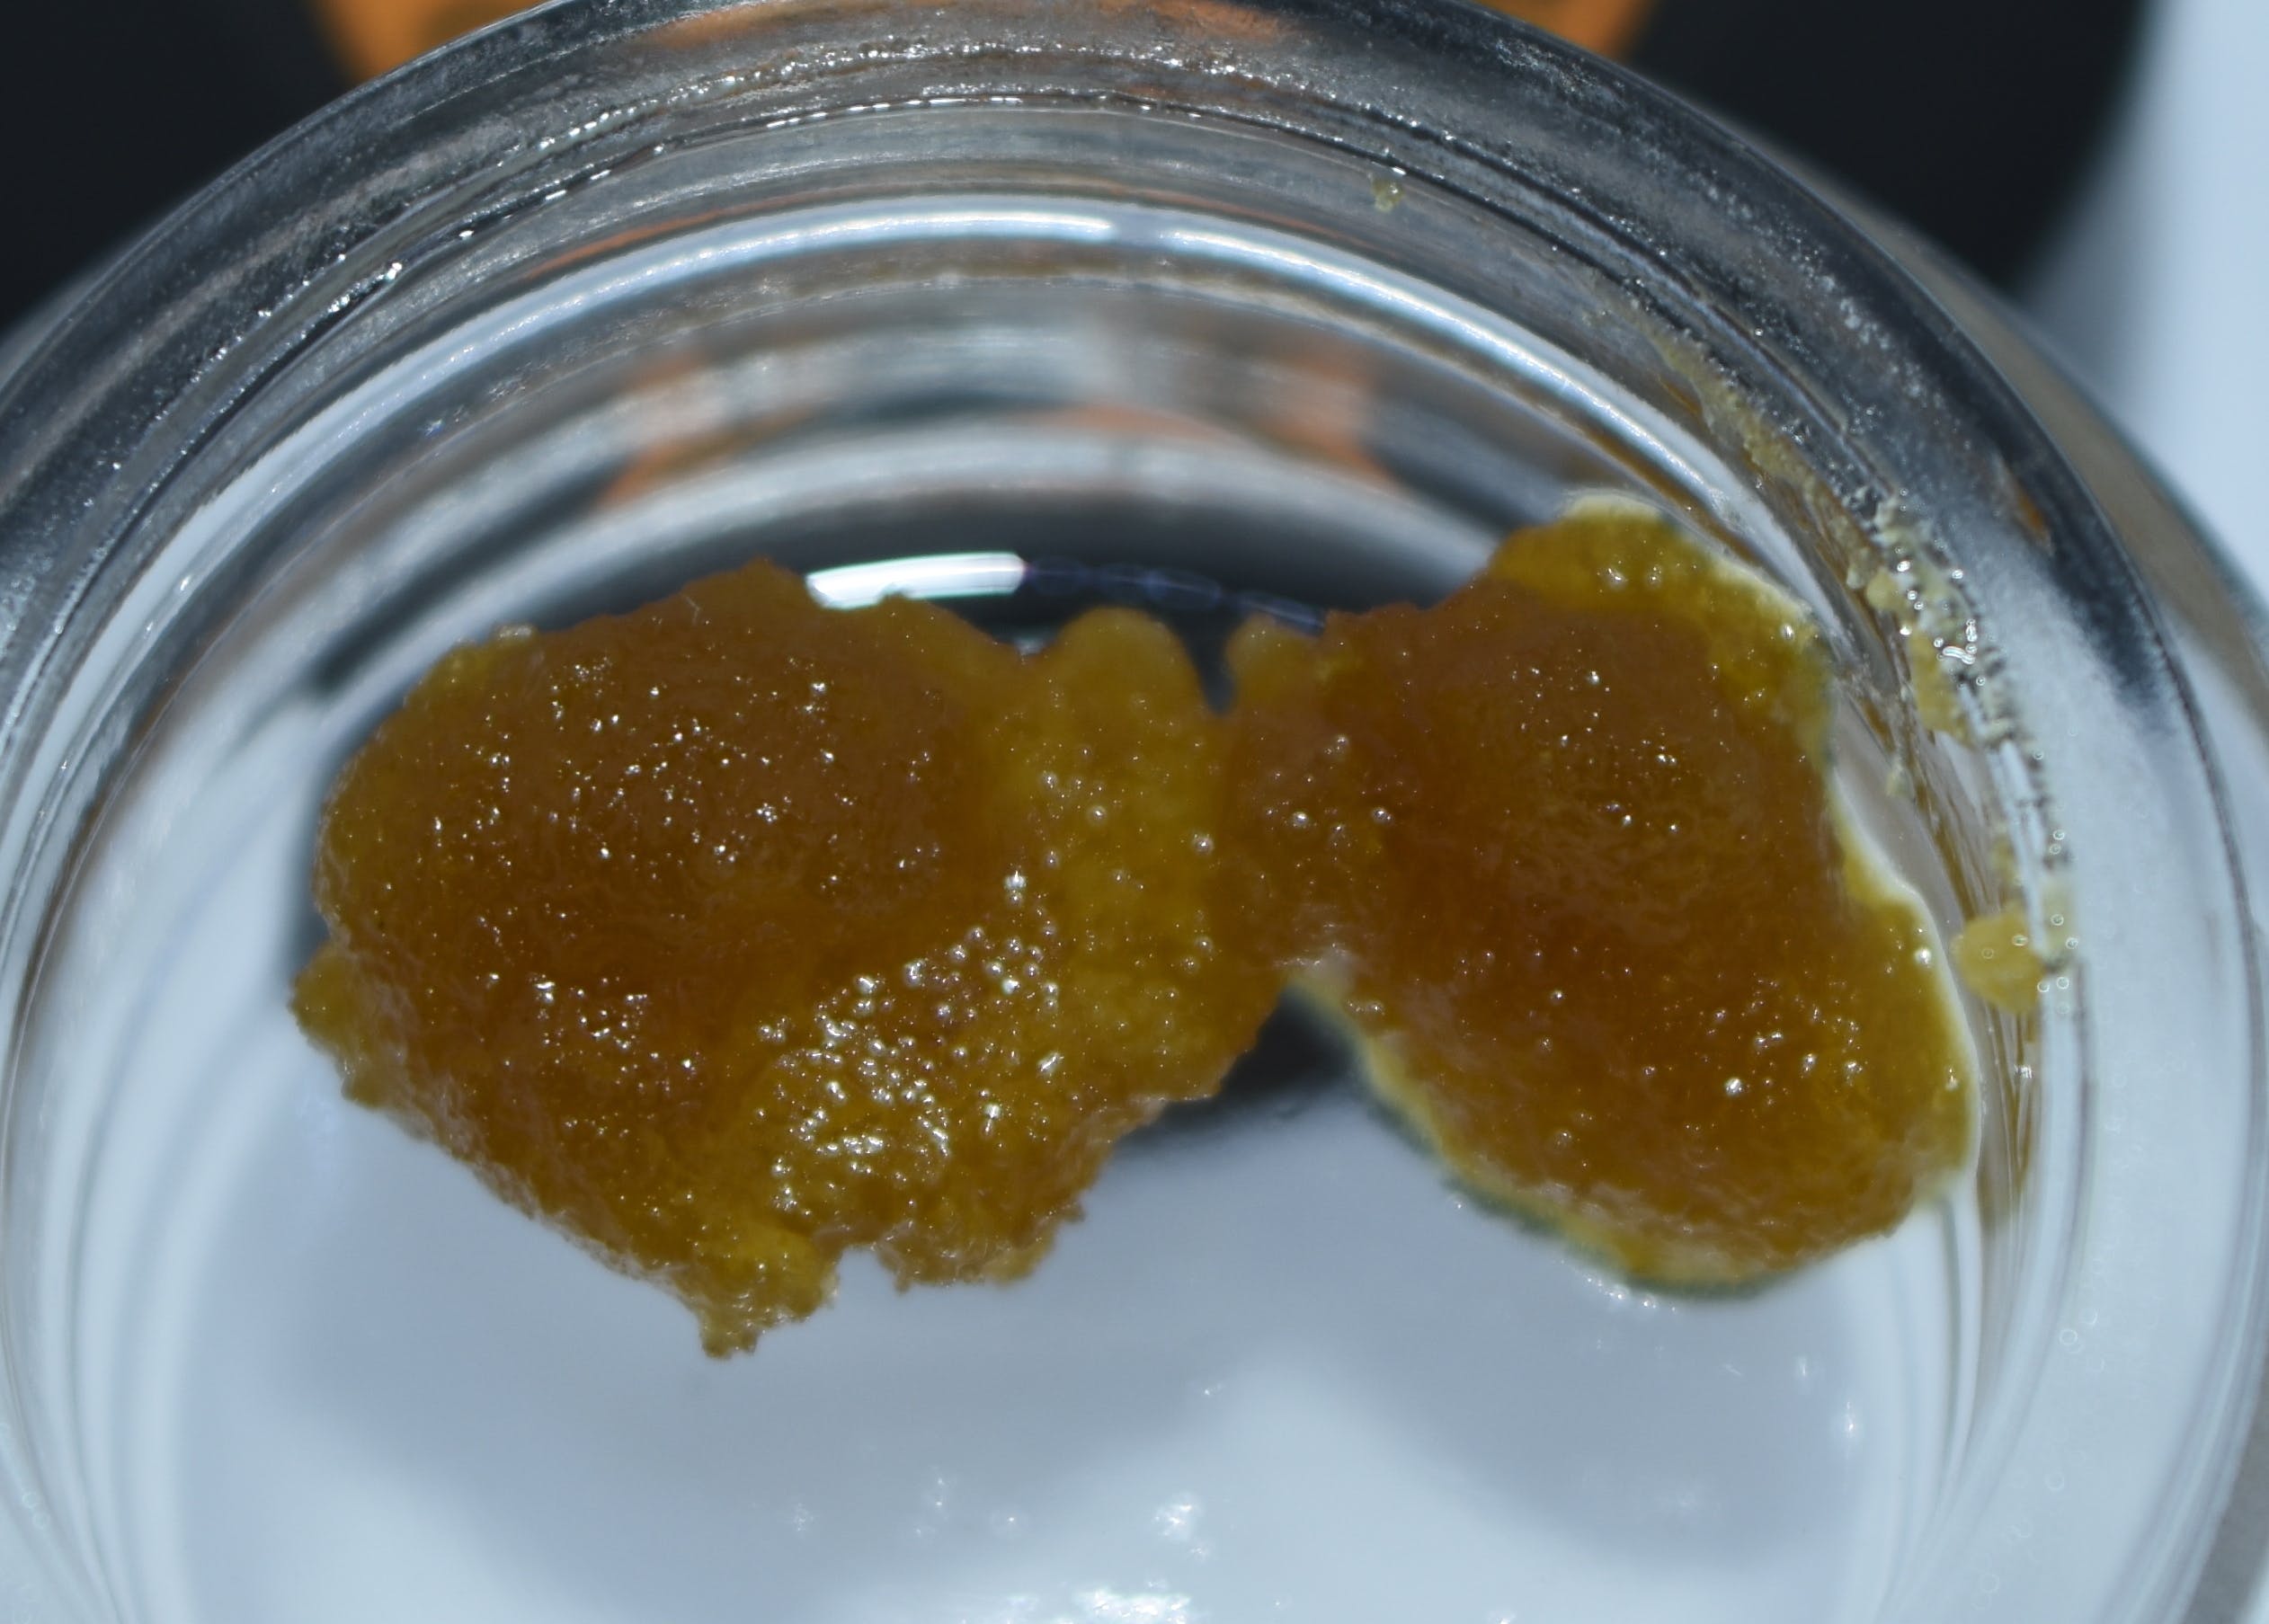 concentrate-chem-4-live-resin-small-batch-r569-80-43-25-thc